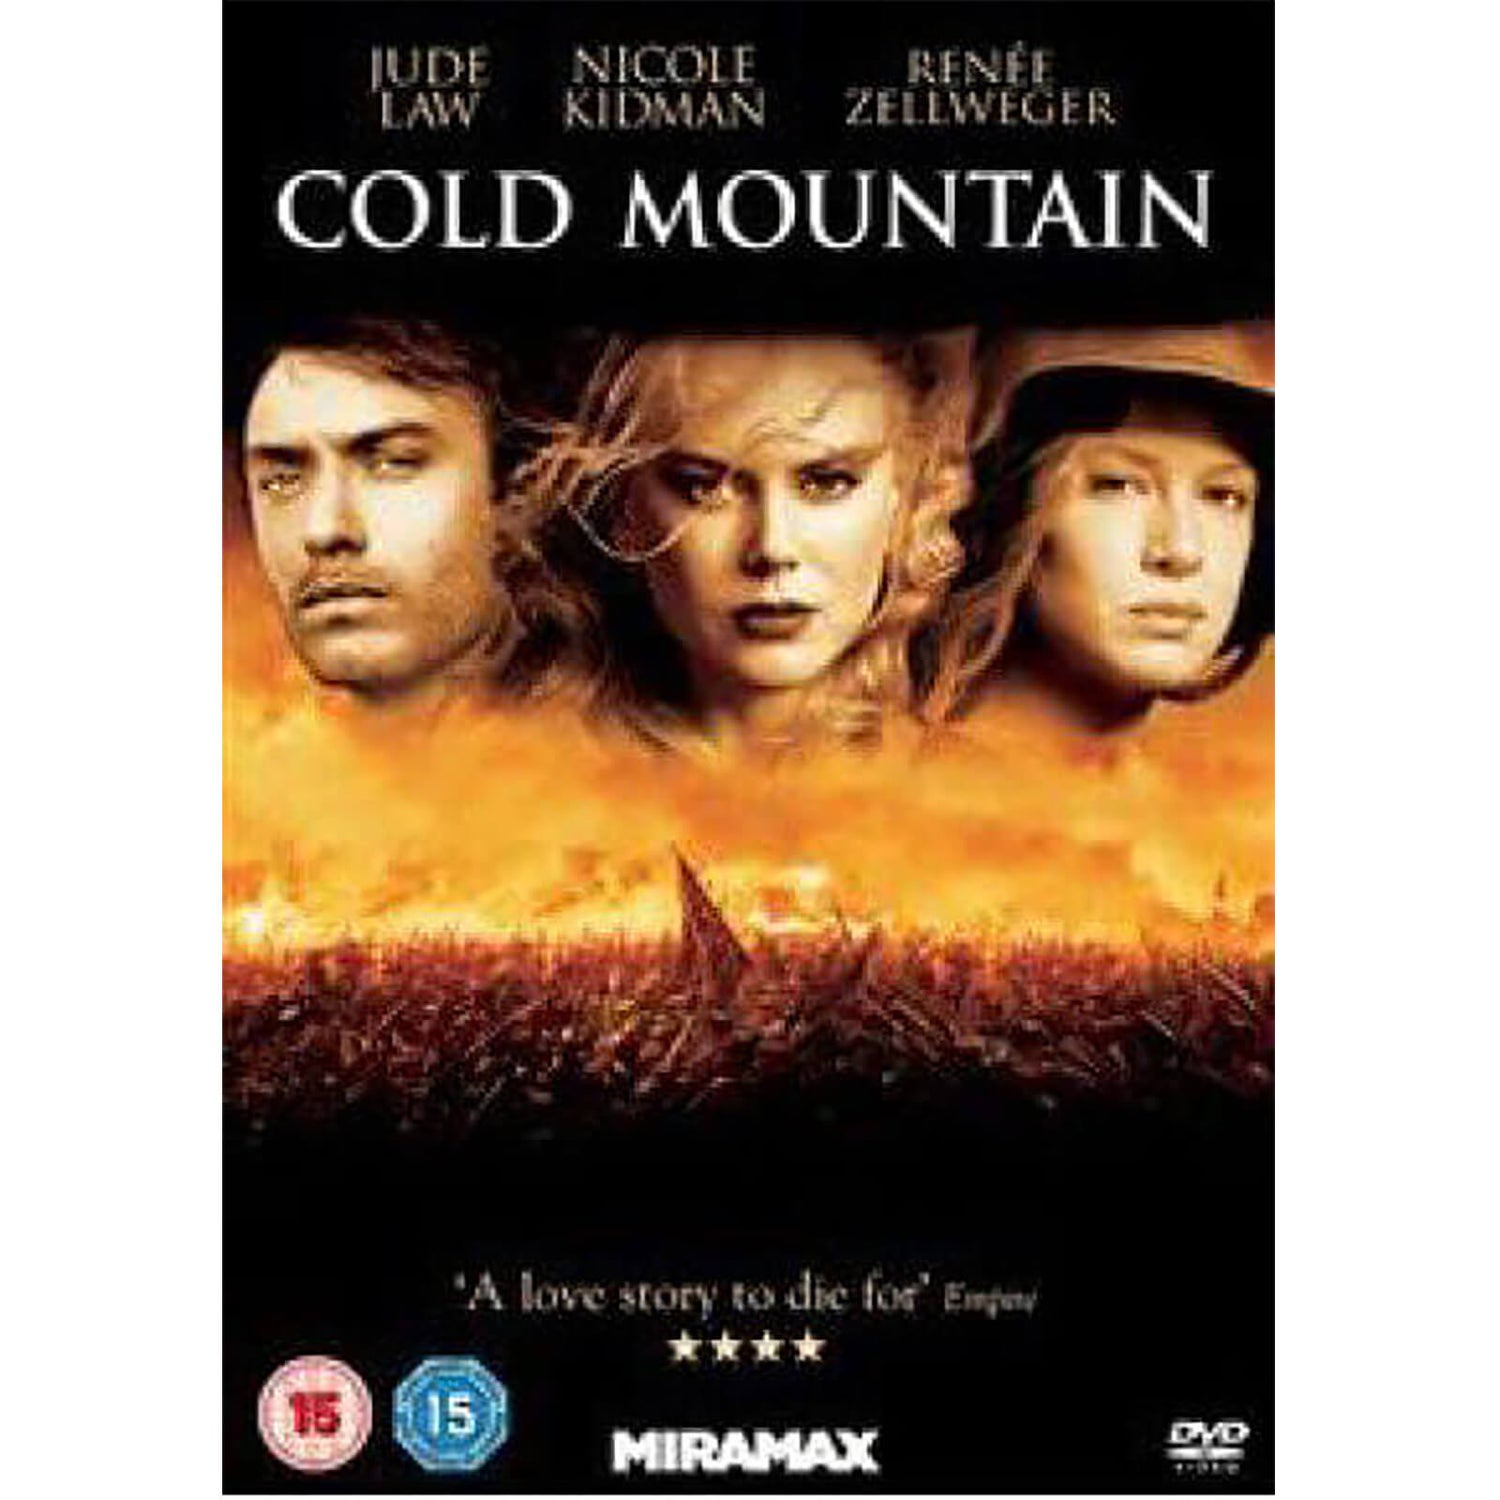 Cold Mountain - Limited Steelbook Edition